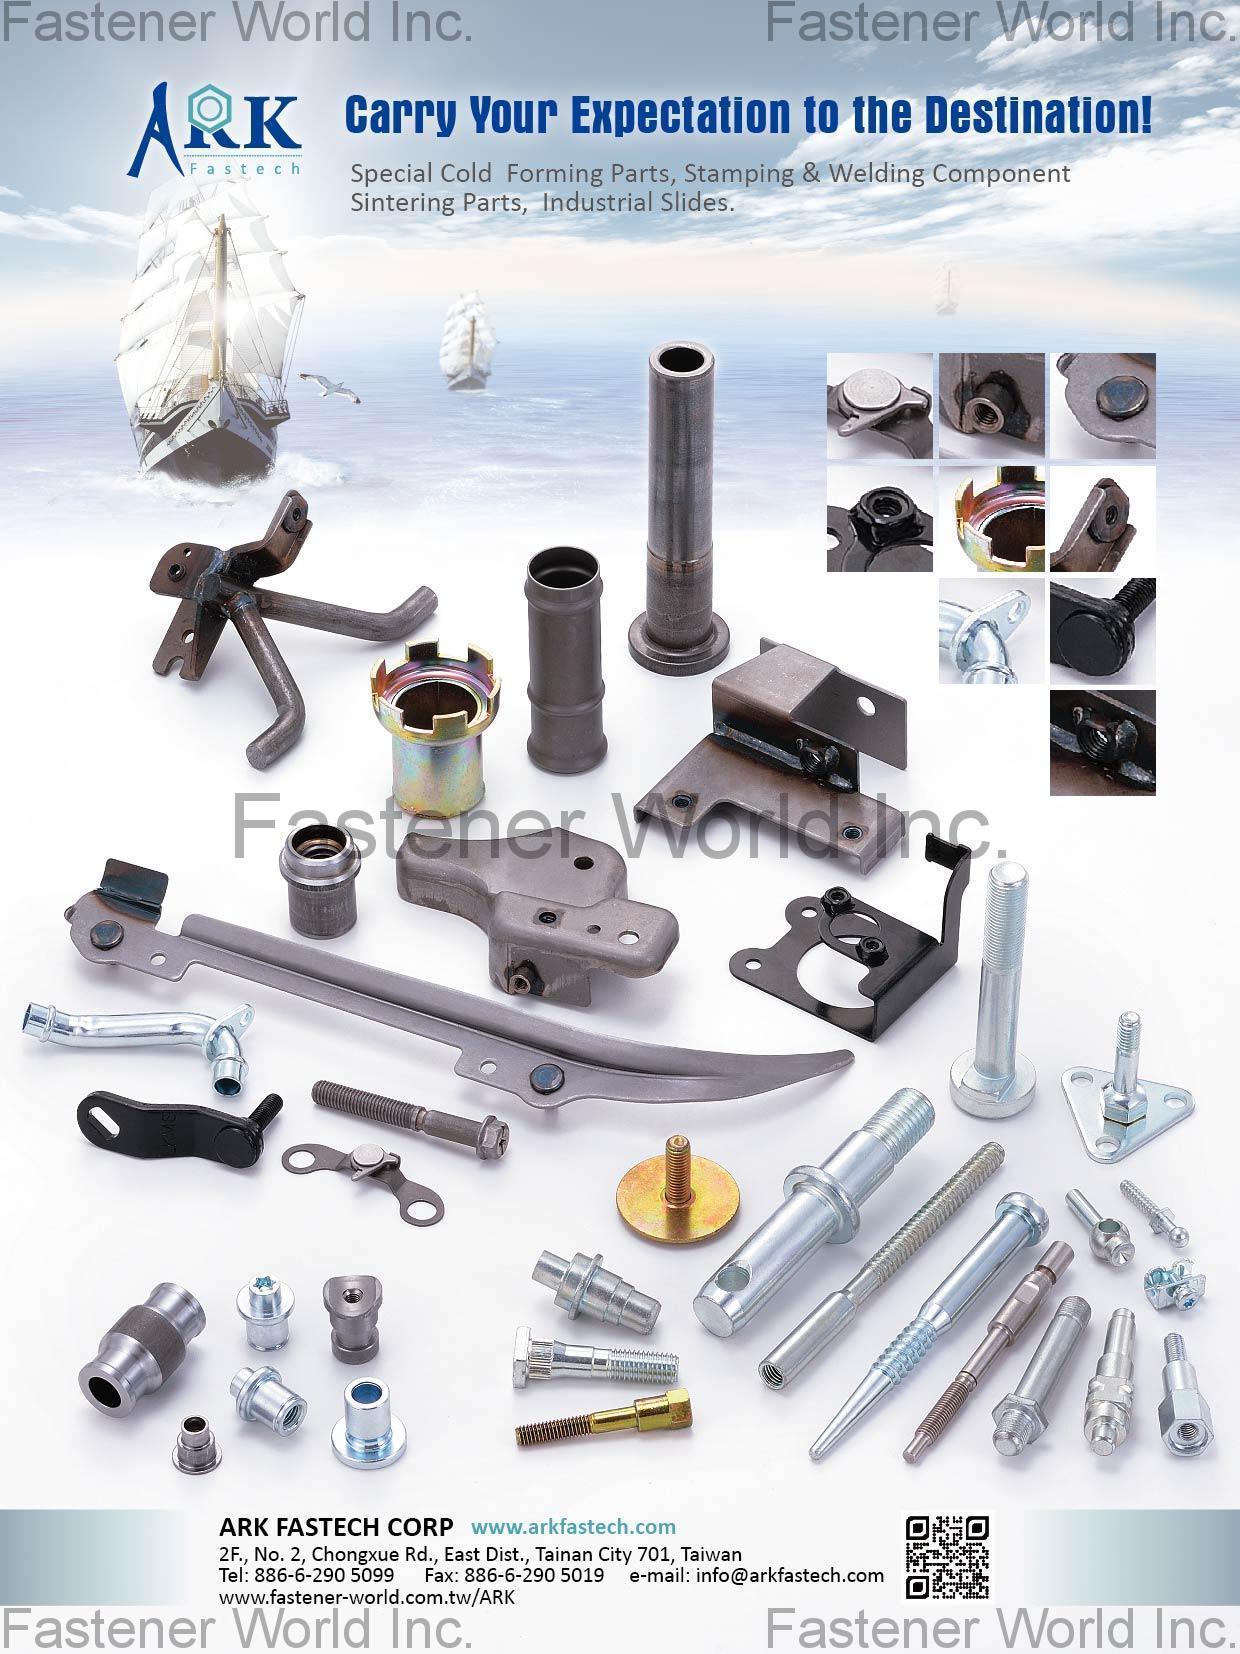 ARK FASTECH CORP , Special cold forming parts/Stamping&welding component/Sintering parts/Industrial slides , Special Parts